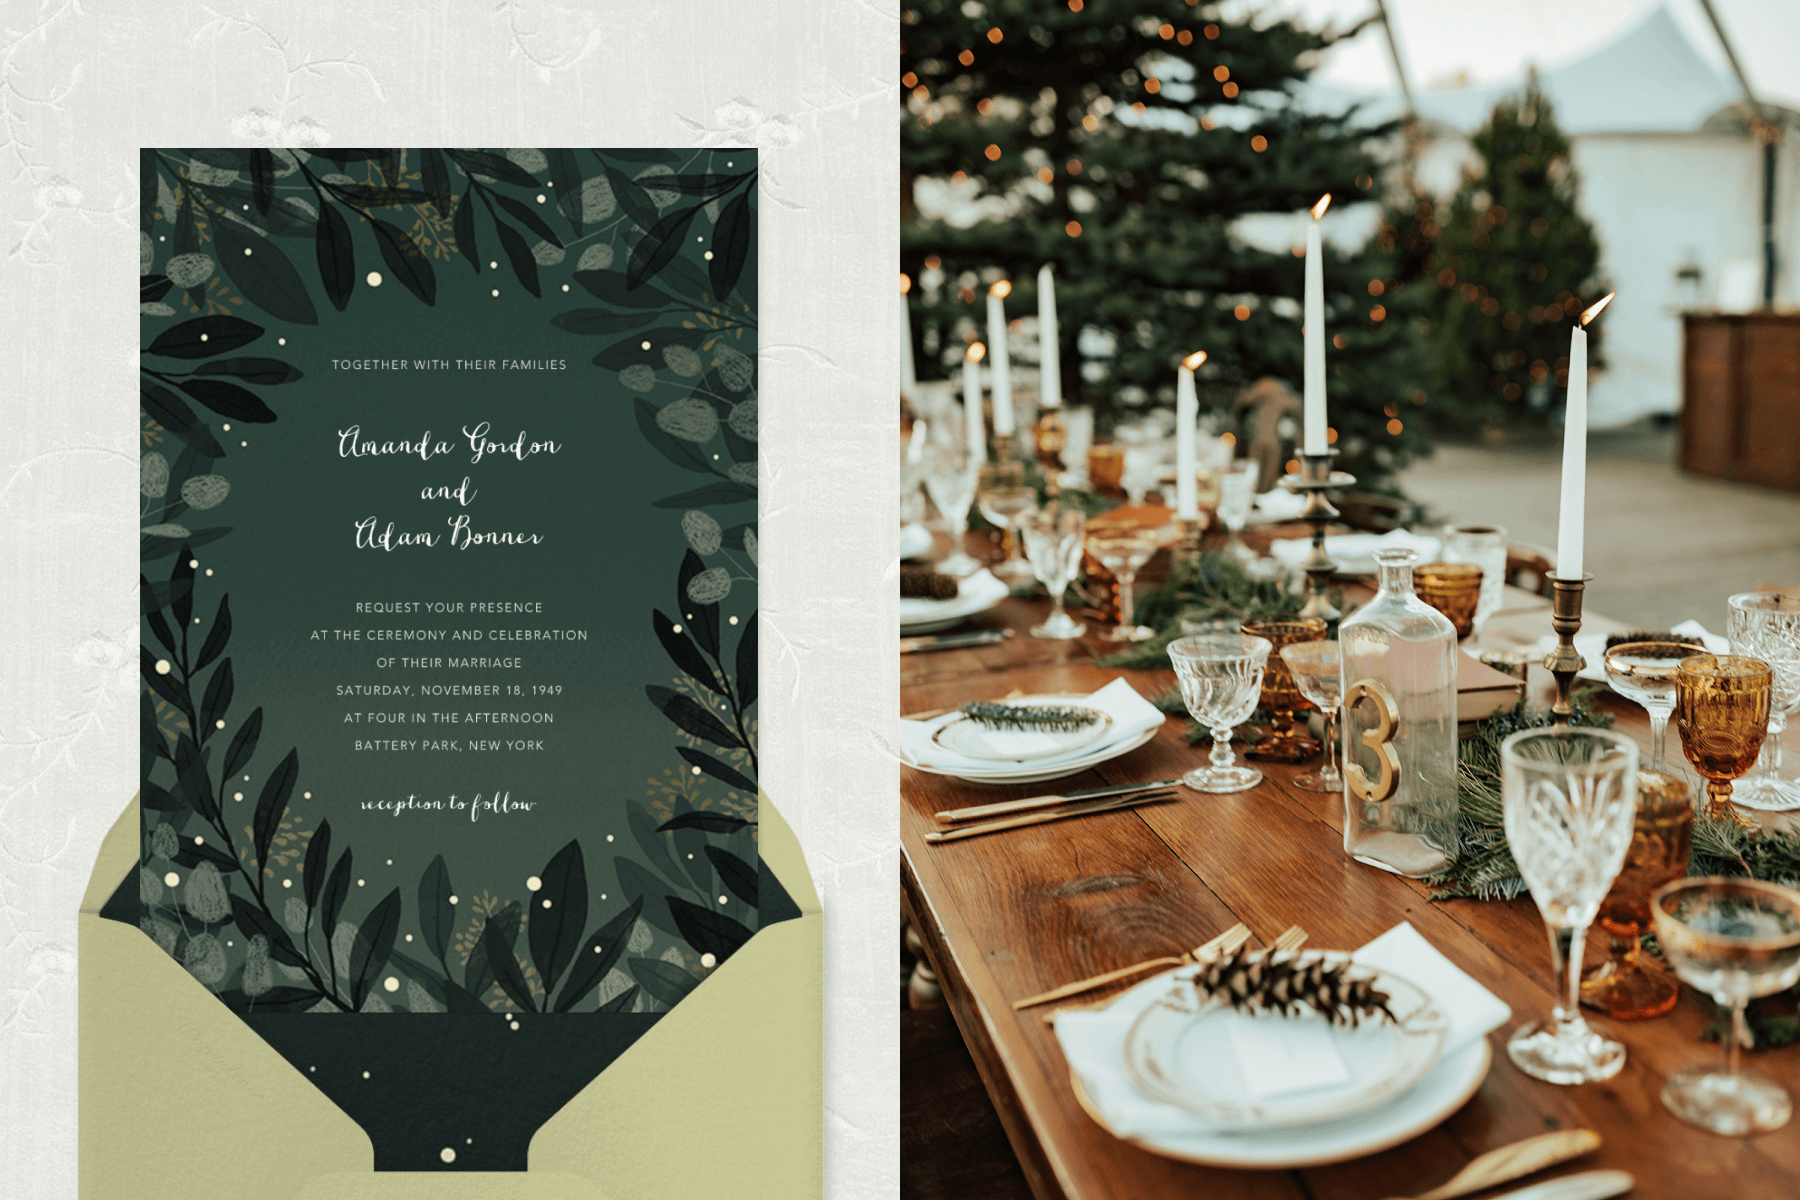 Left: A dark green card with leafy branches forming a border and white starry dots emerges from a kiwi green envelope. Right: A wooden banquet table is set for a wintery celebration with white taper candles, pinecones, and sprigs of fir with a Christmas tree in the background.